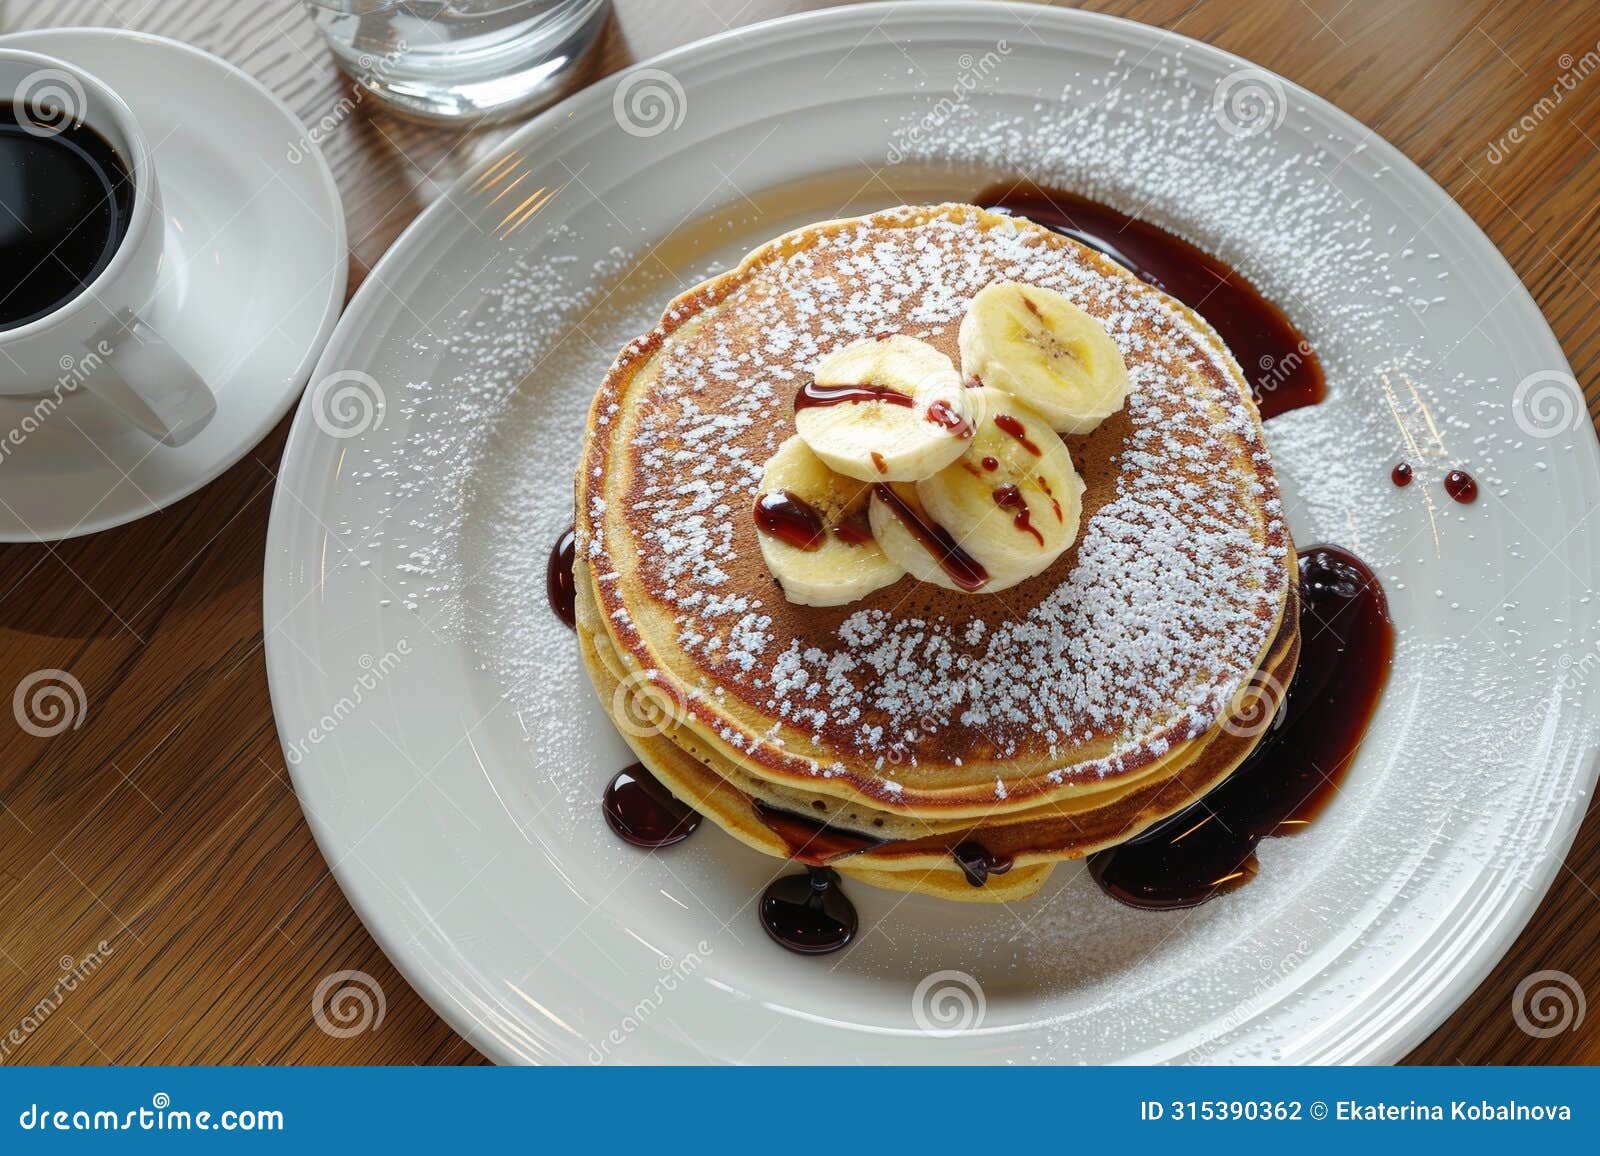 scrumptious chocolate pancakes with a ripe banana elegantly arranged on a white plate, top view